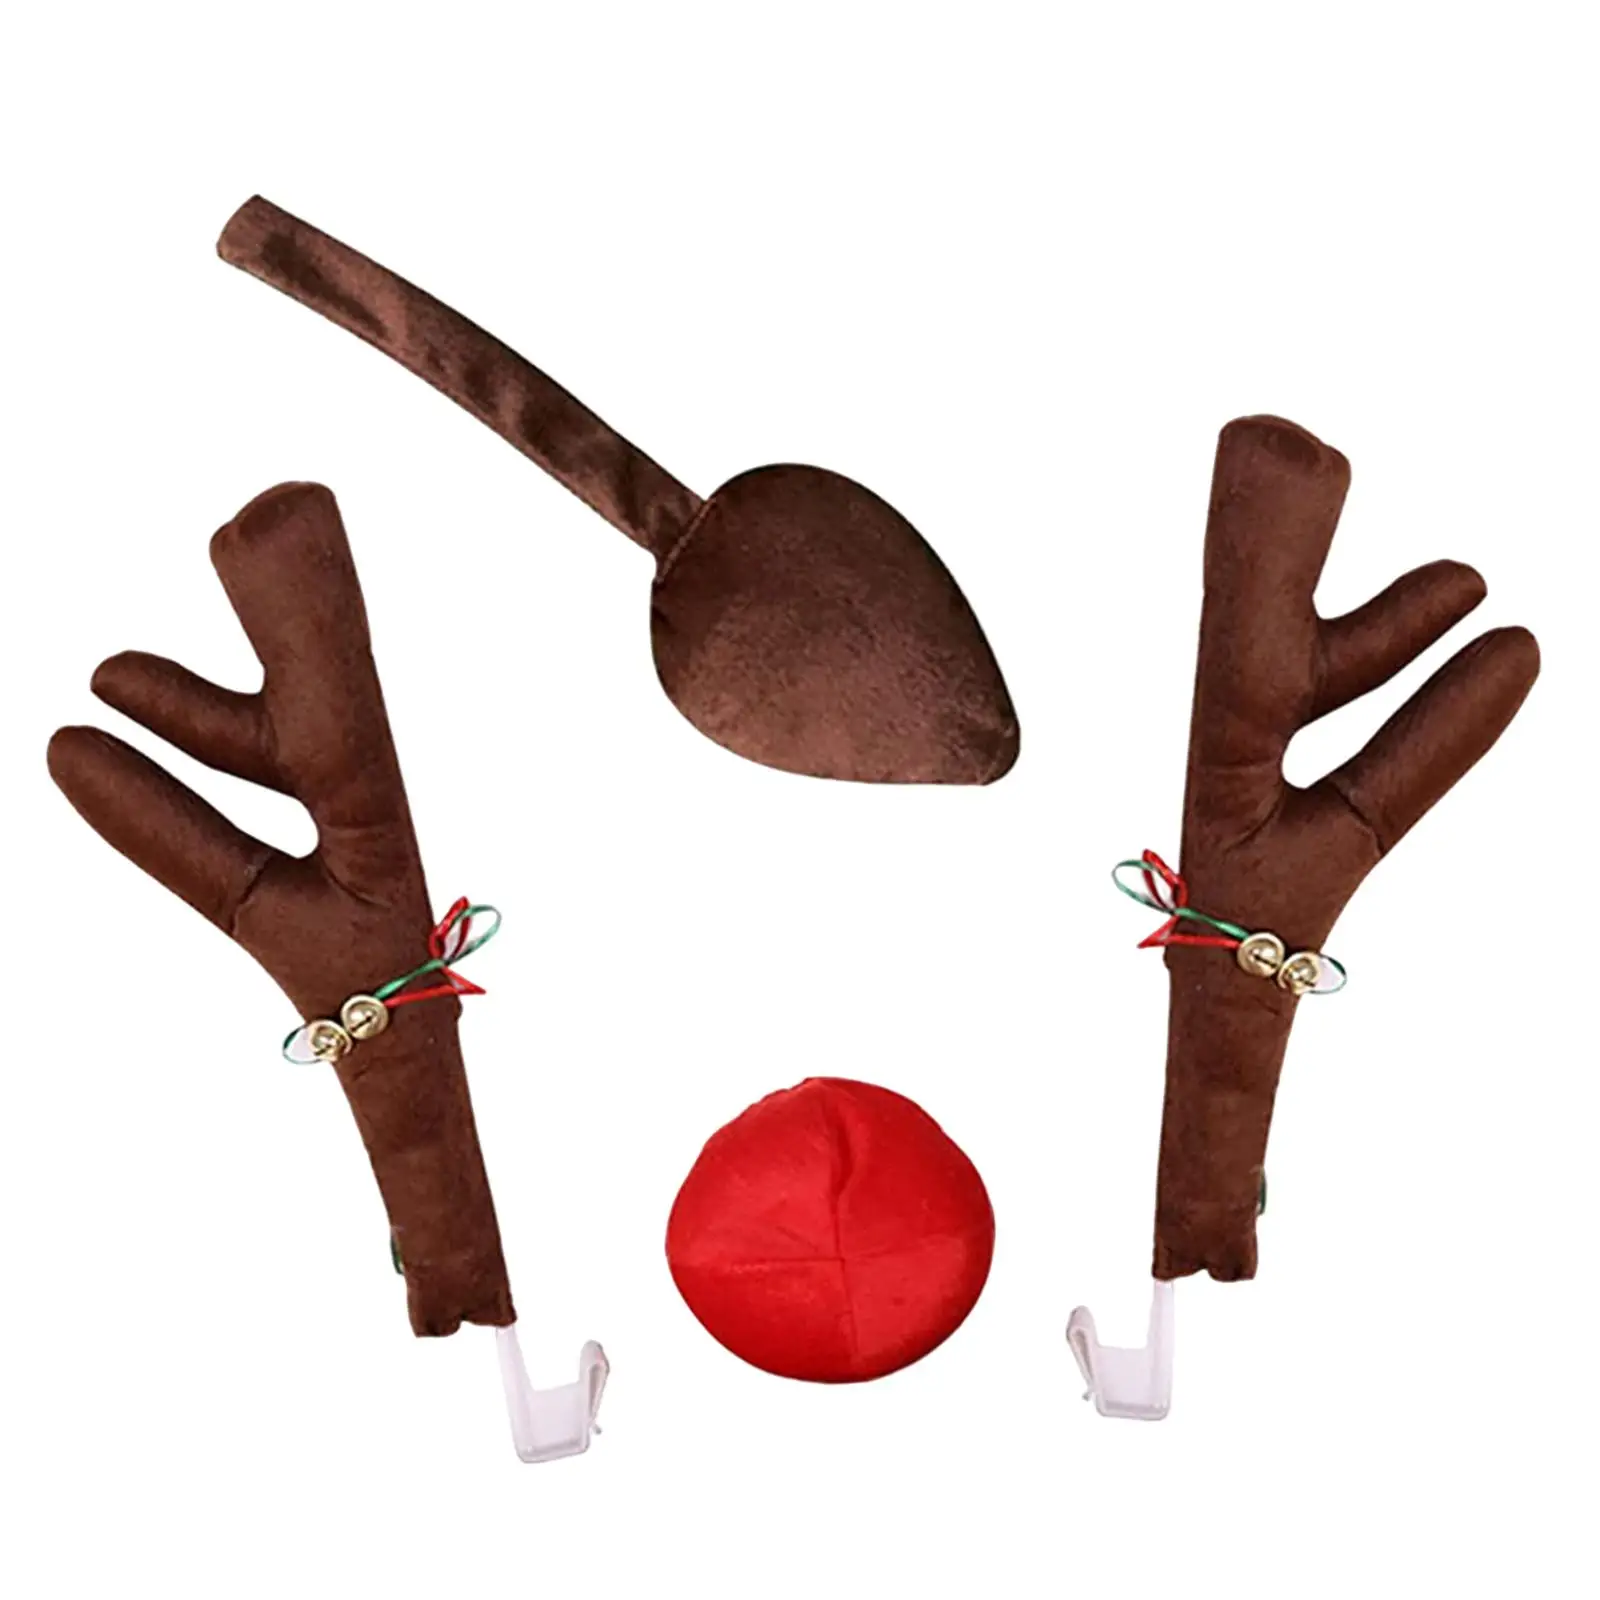 Christmas Reindeer Antlers Car Decoration Kit Party Accessory Easy Installation for SUV Van